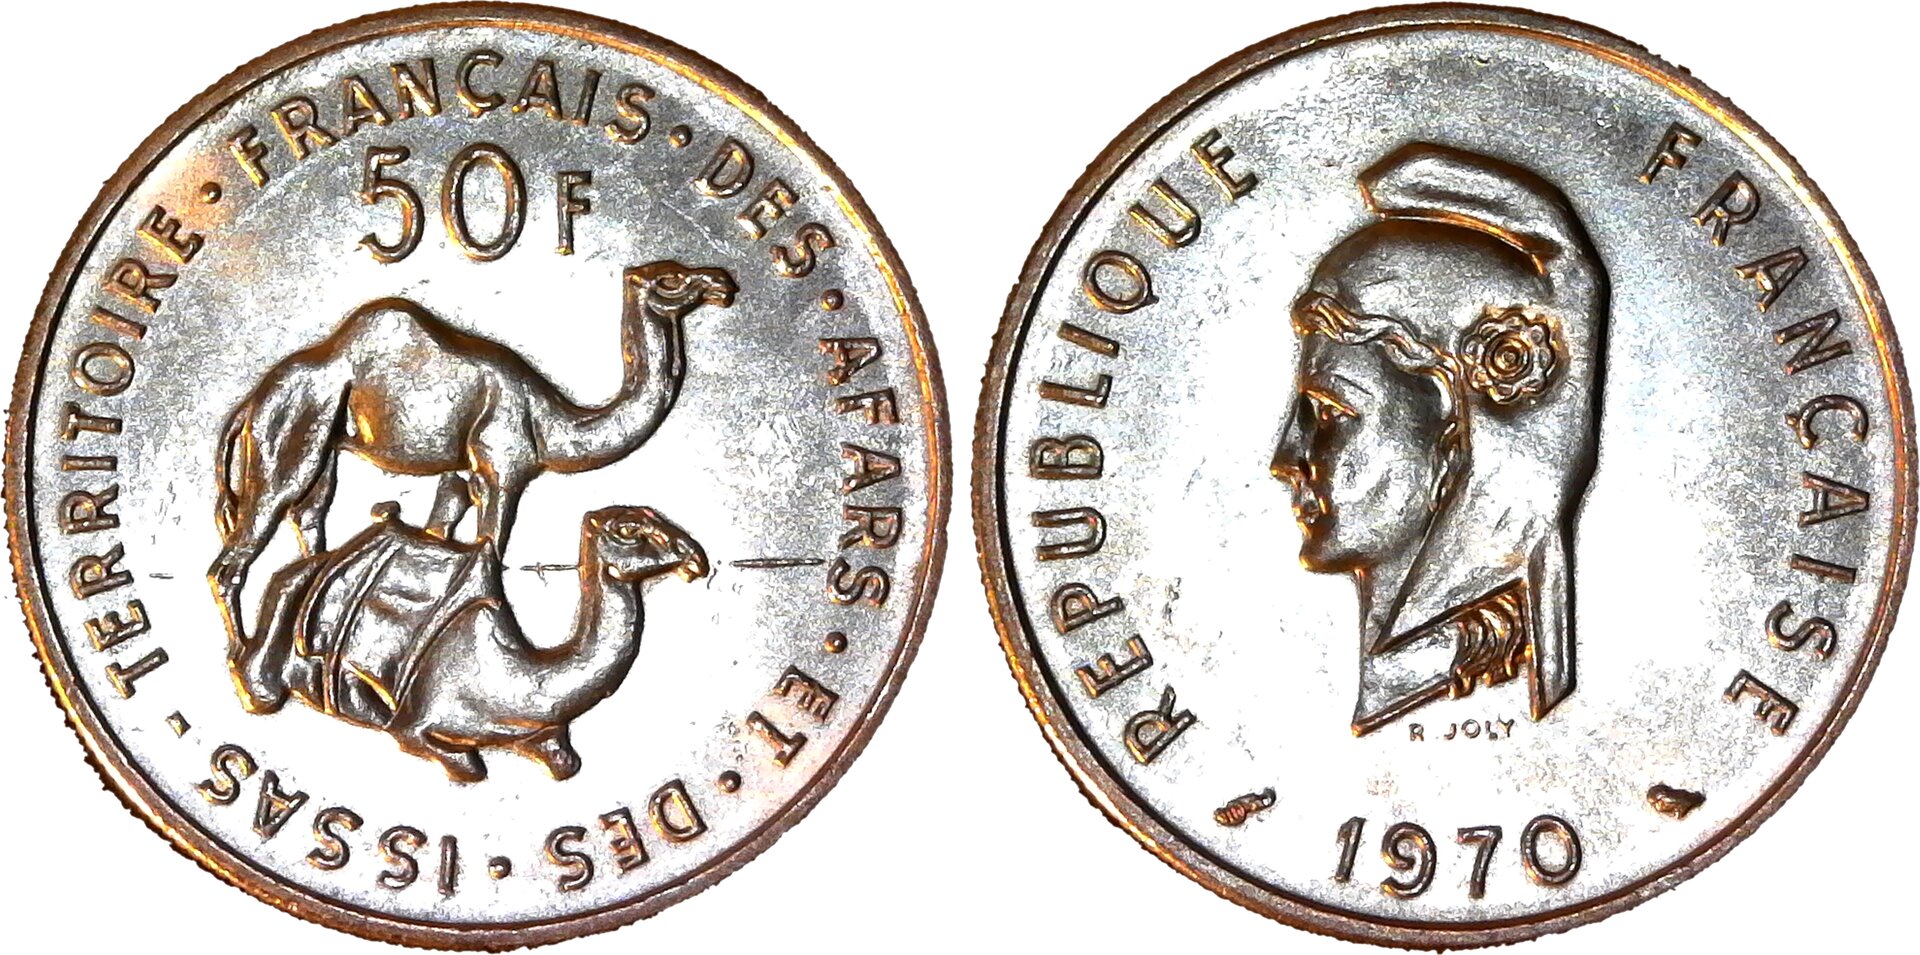 French Afars and Issas 50 Francs 1970 obverse-side-cutout.jpg